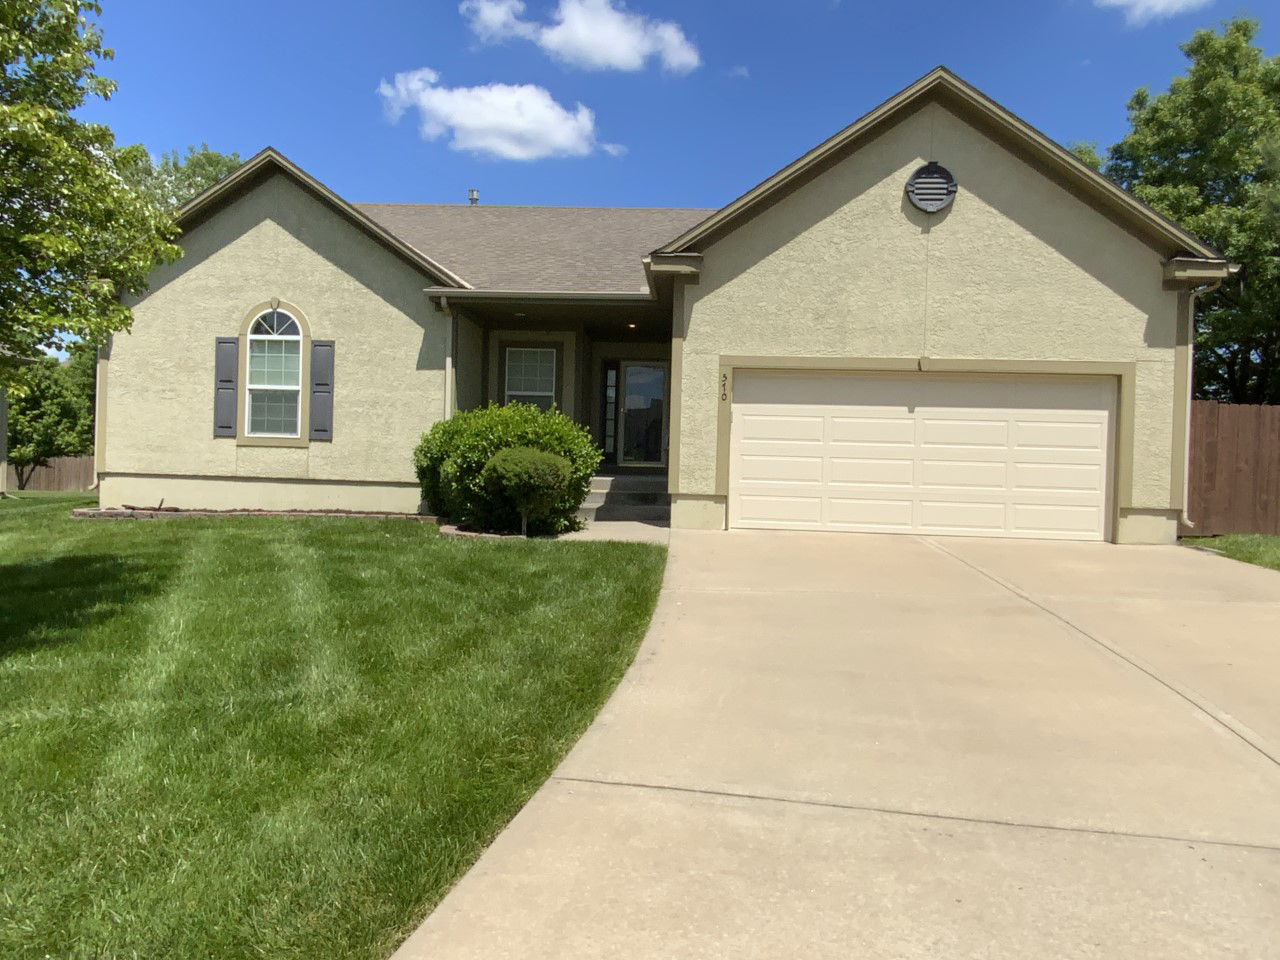 Lenexa, KS – Before & After Painting Before